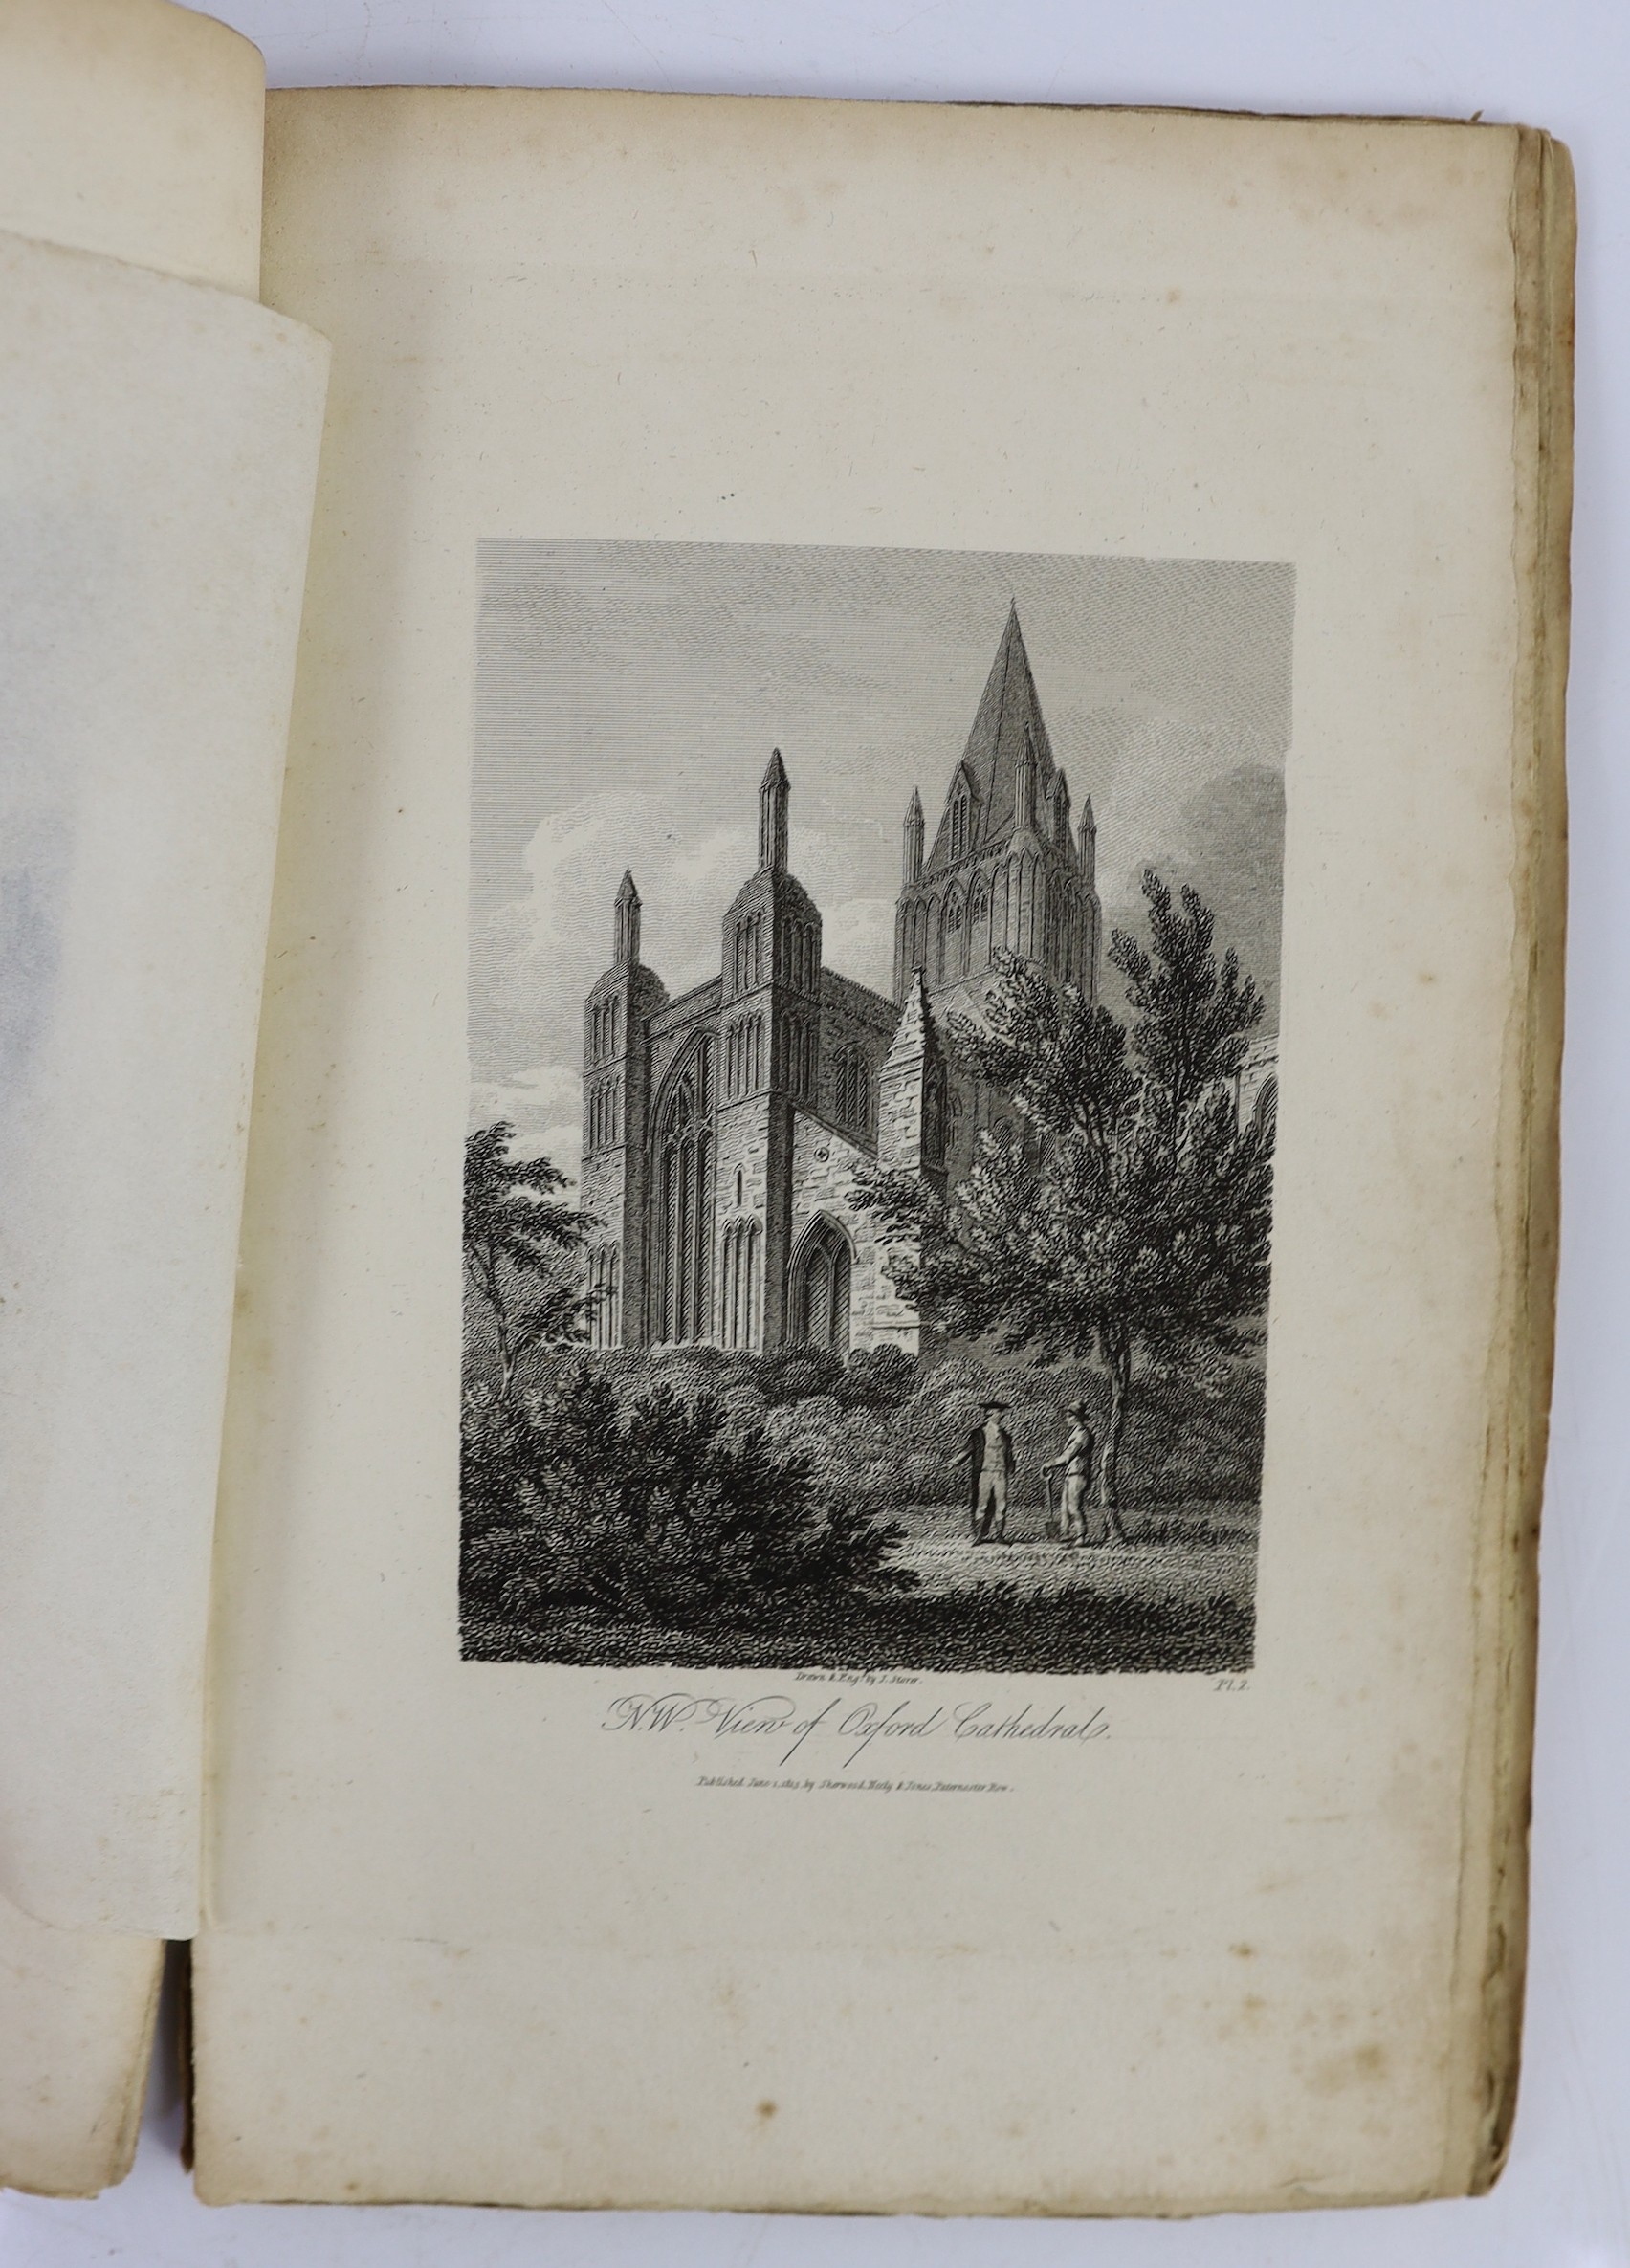 OXON: Warton, Rev. Thomas - The History and Antiquities of Kiddington....3rd edition. frontis.; old half calf and marbled boards, gilt top and marbled e/ps., 4to. 1815; Weare, T.W., editor - Some Remarks upon the Church